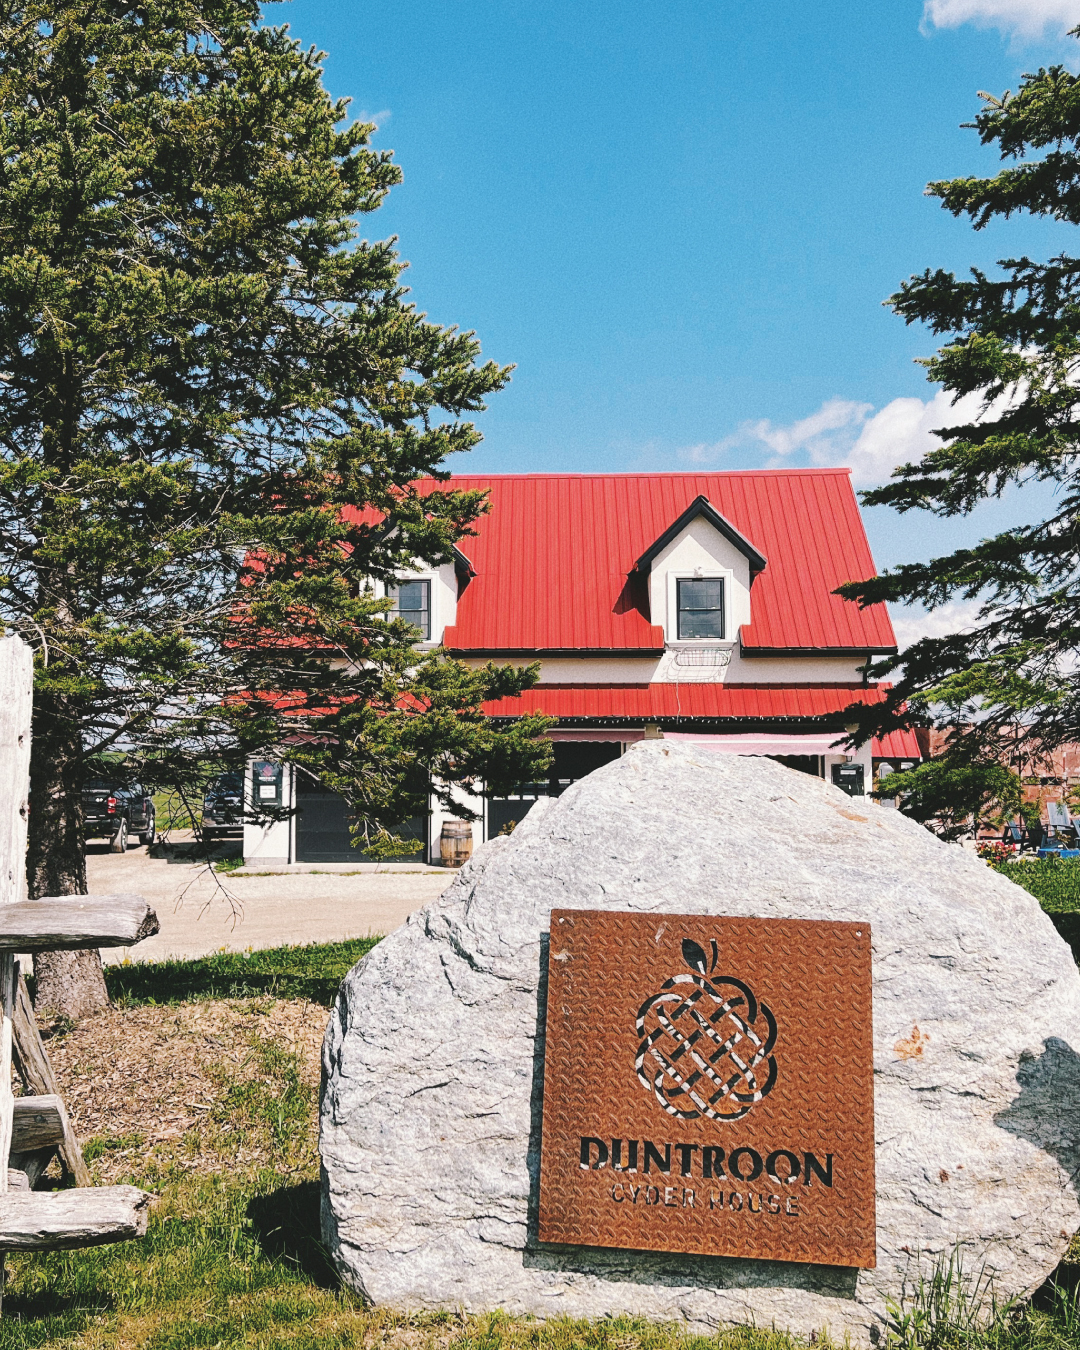 The Duntroon Cyder House, a farm house with a red roof, and a sign for the business hung on a rock